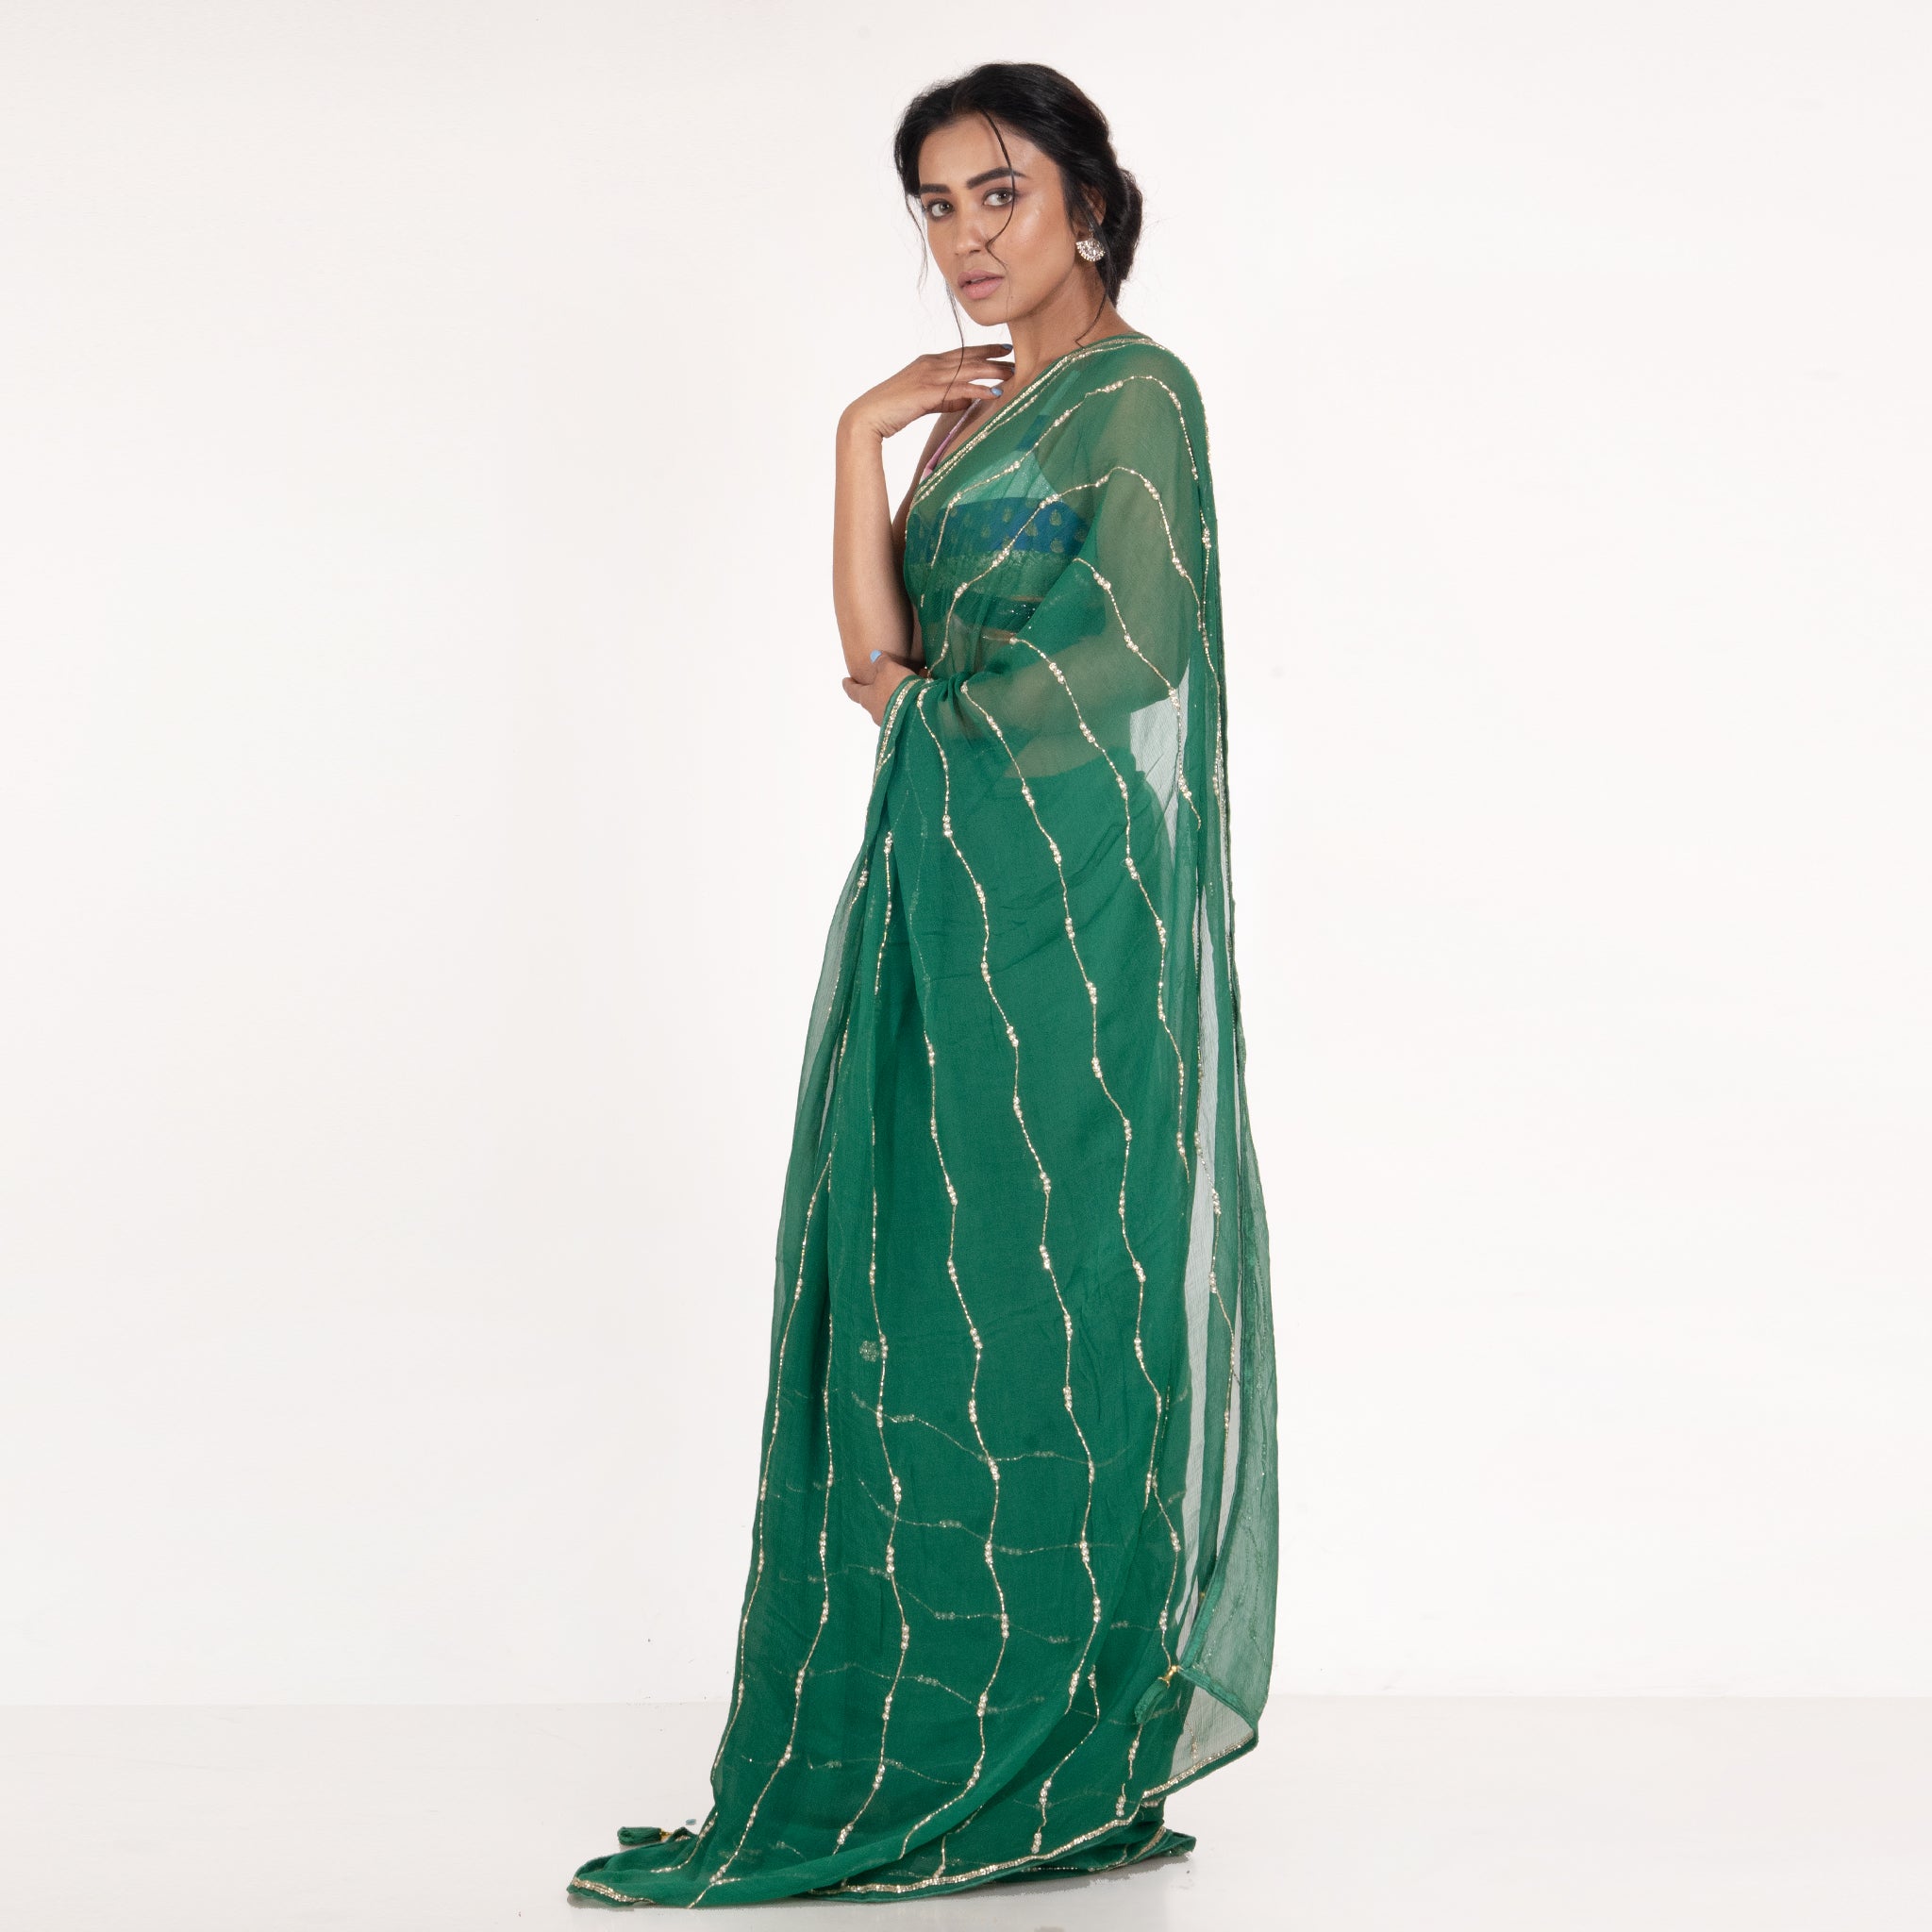 Women's Forest Green Pure Chiffon Saree With Hand Embroidered Work Of Pearl And Beads - Boveee